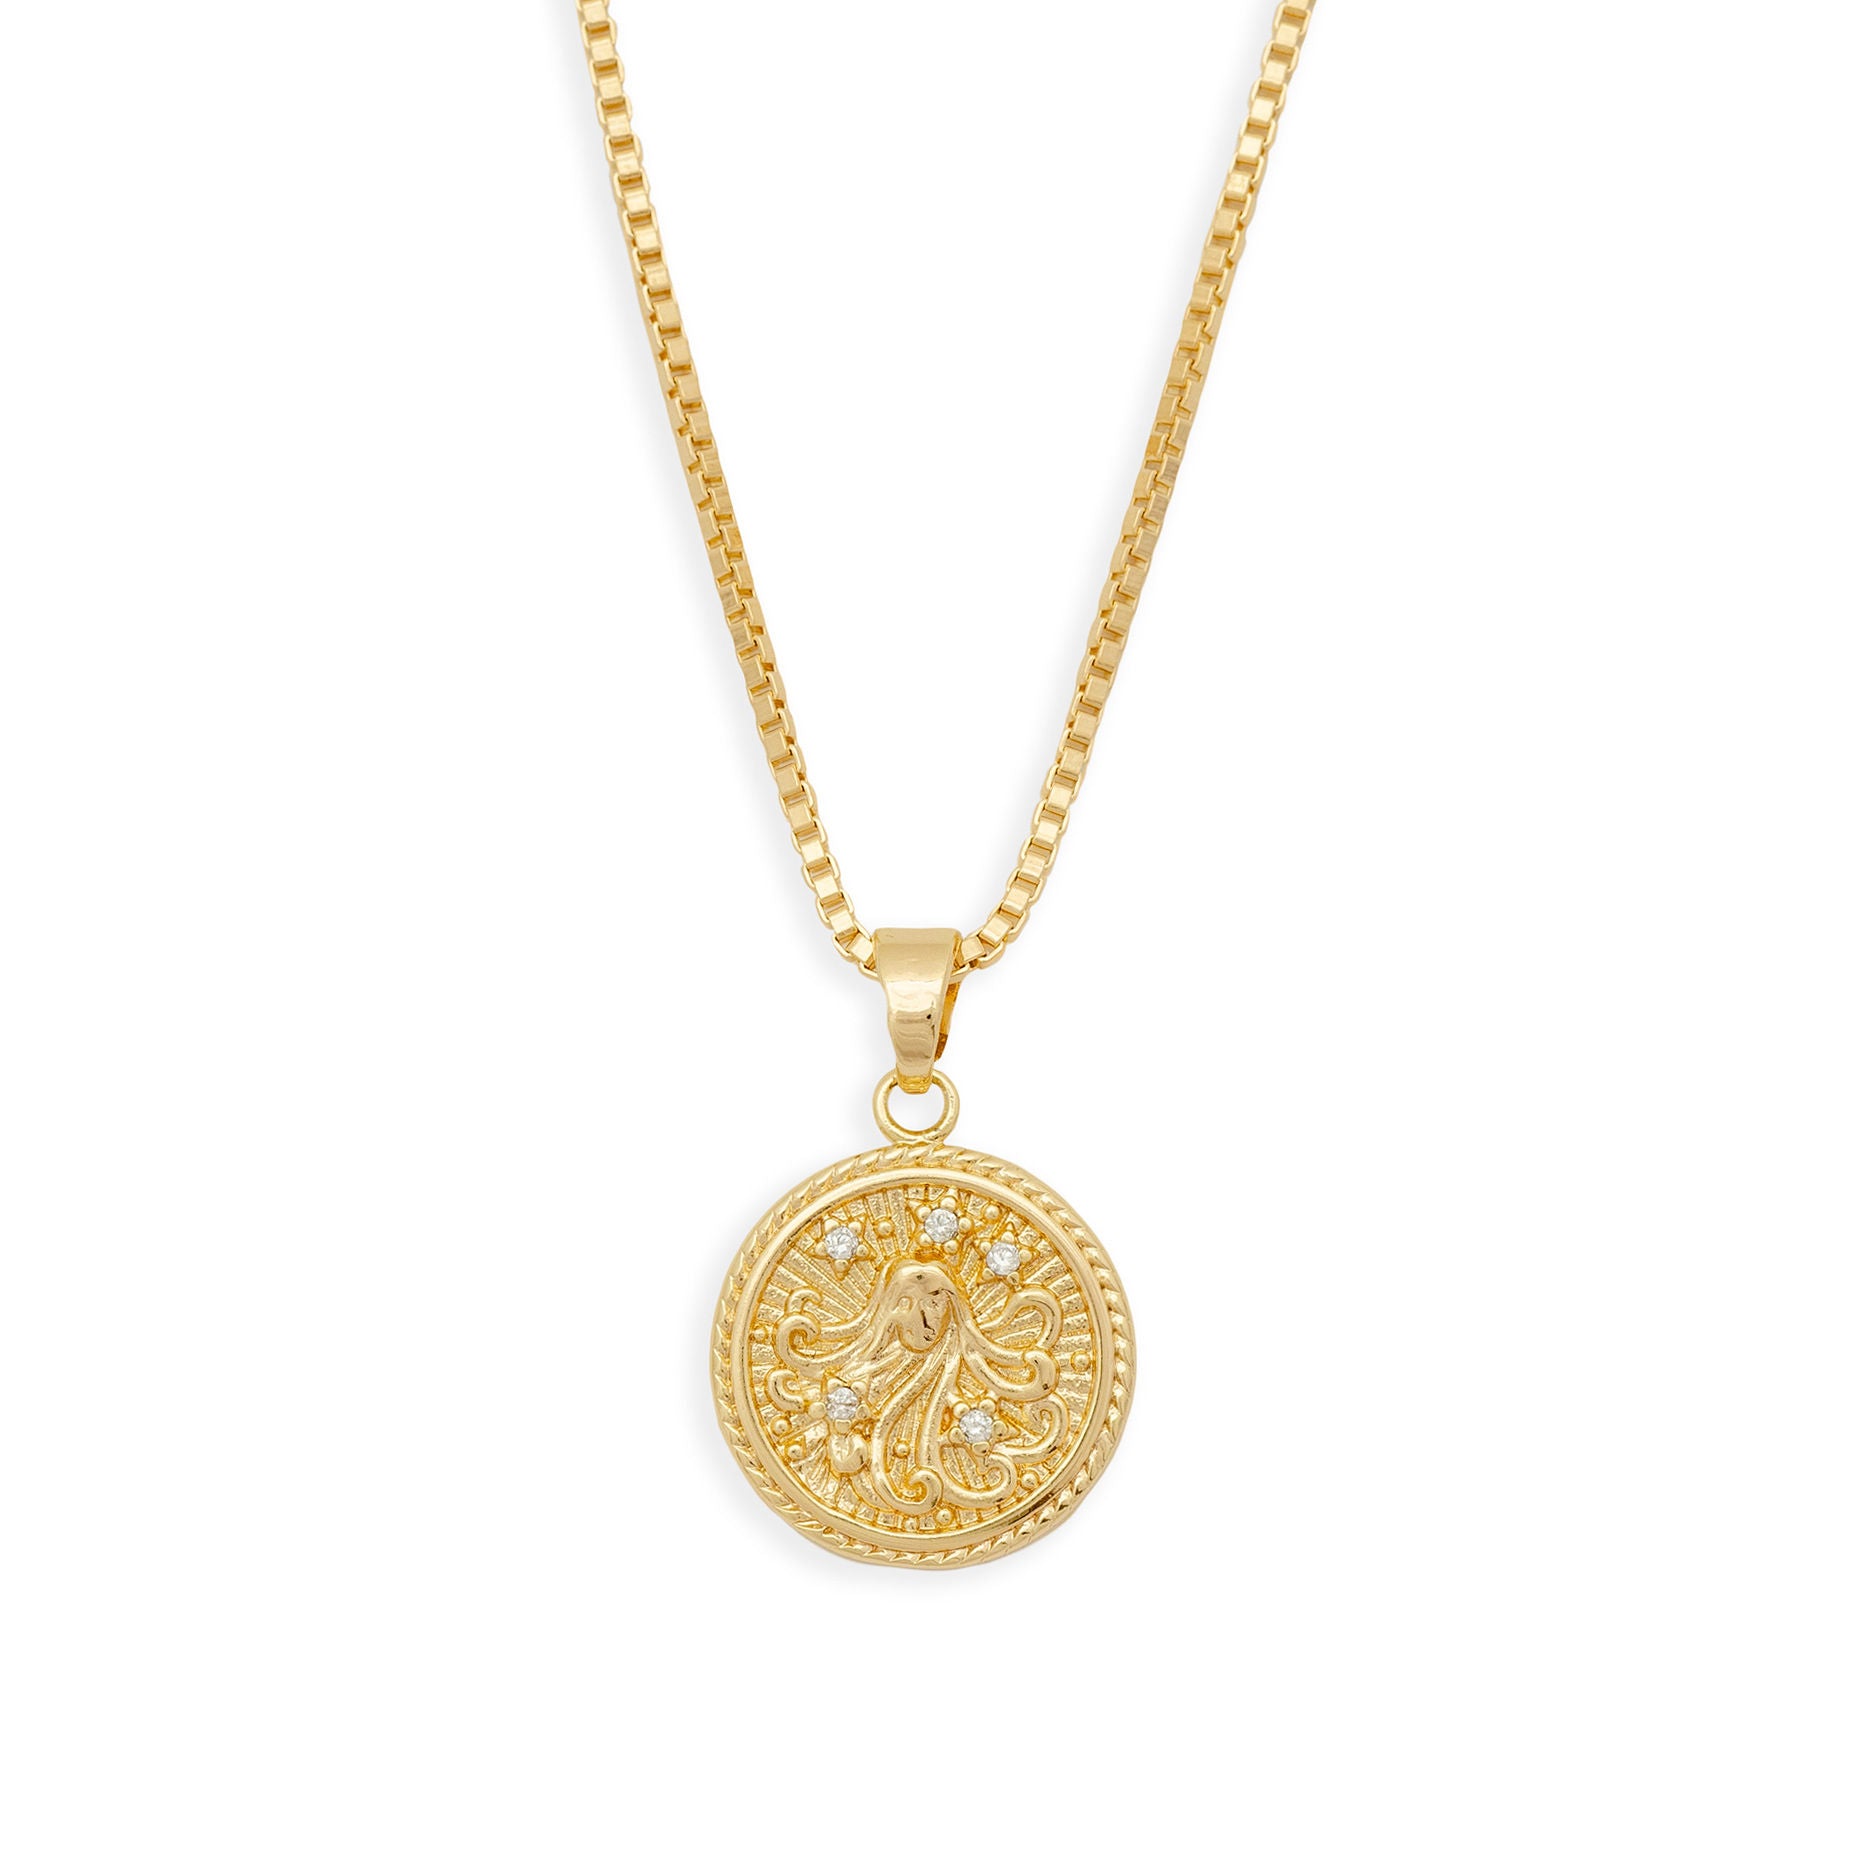 In the Stars Zodiac Necklace - Virgo from Erin Fader Jewelry